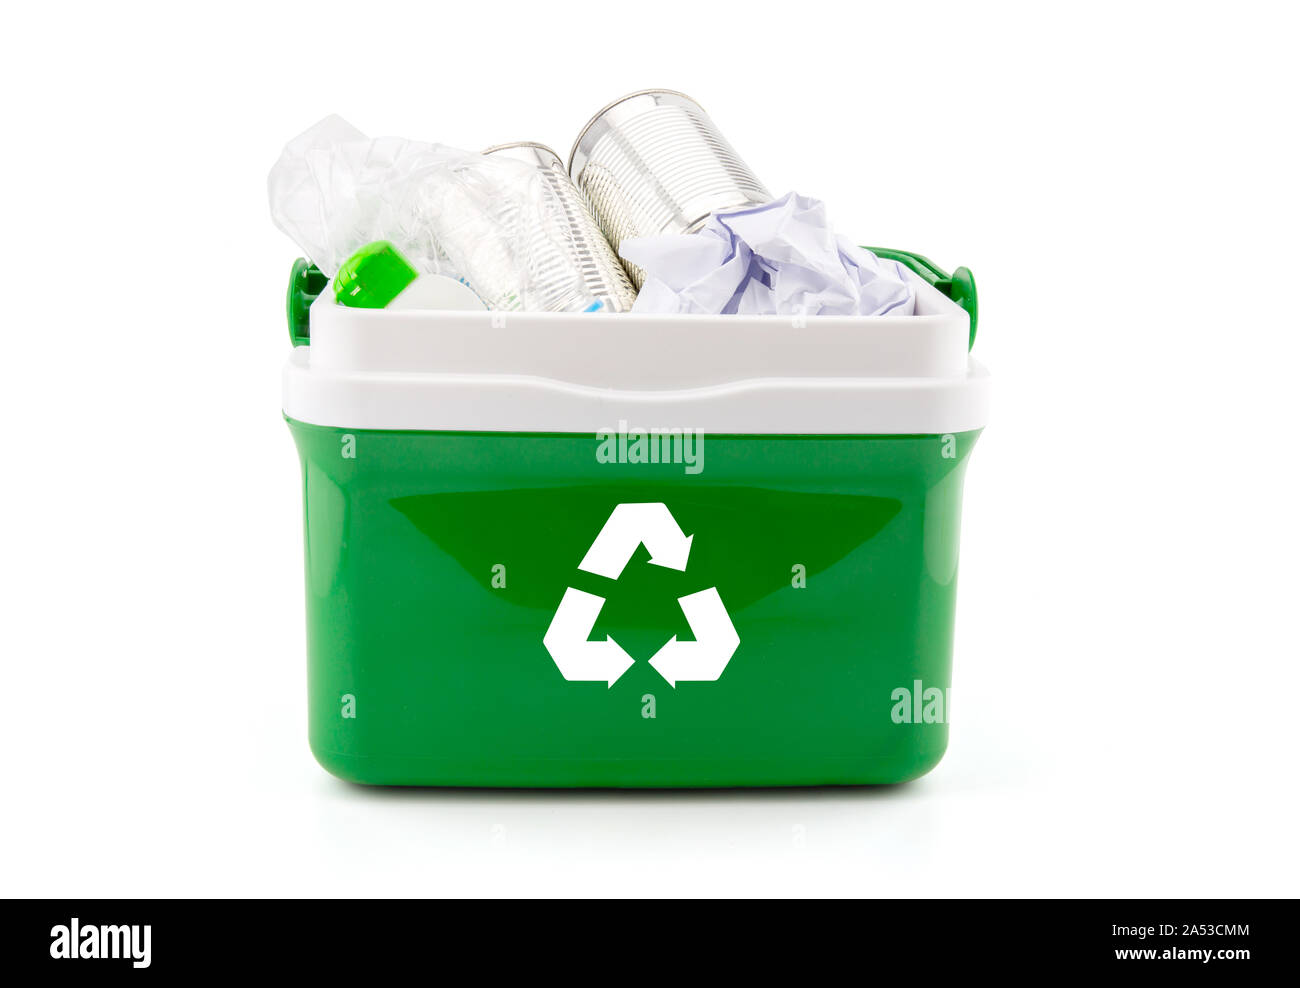 A recycle bin with plastic bottles, paper and other plastic items isolated on white background. Stock Photo